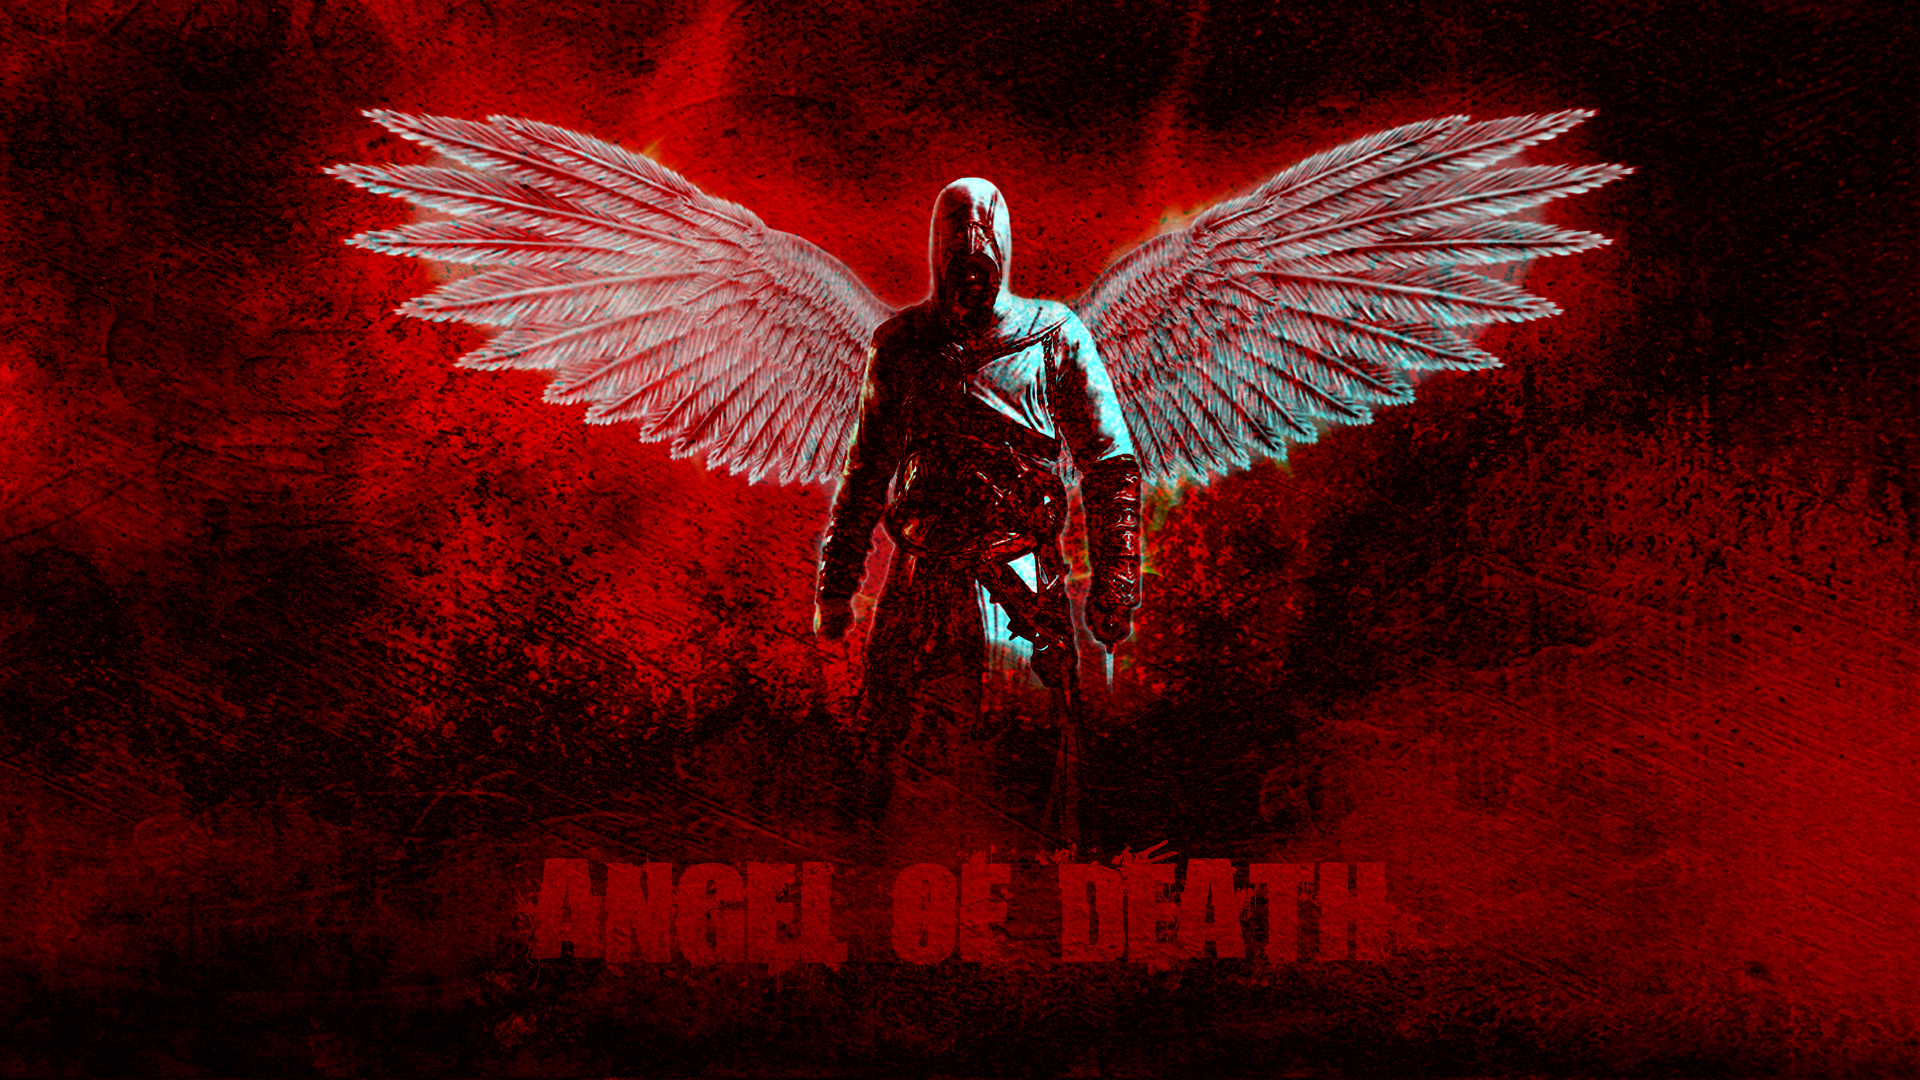 Aggregate more than 79 angel of death wallpaper - in.coedo.com.vn